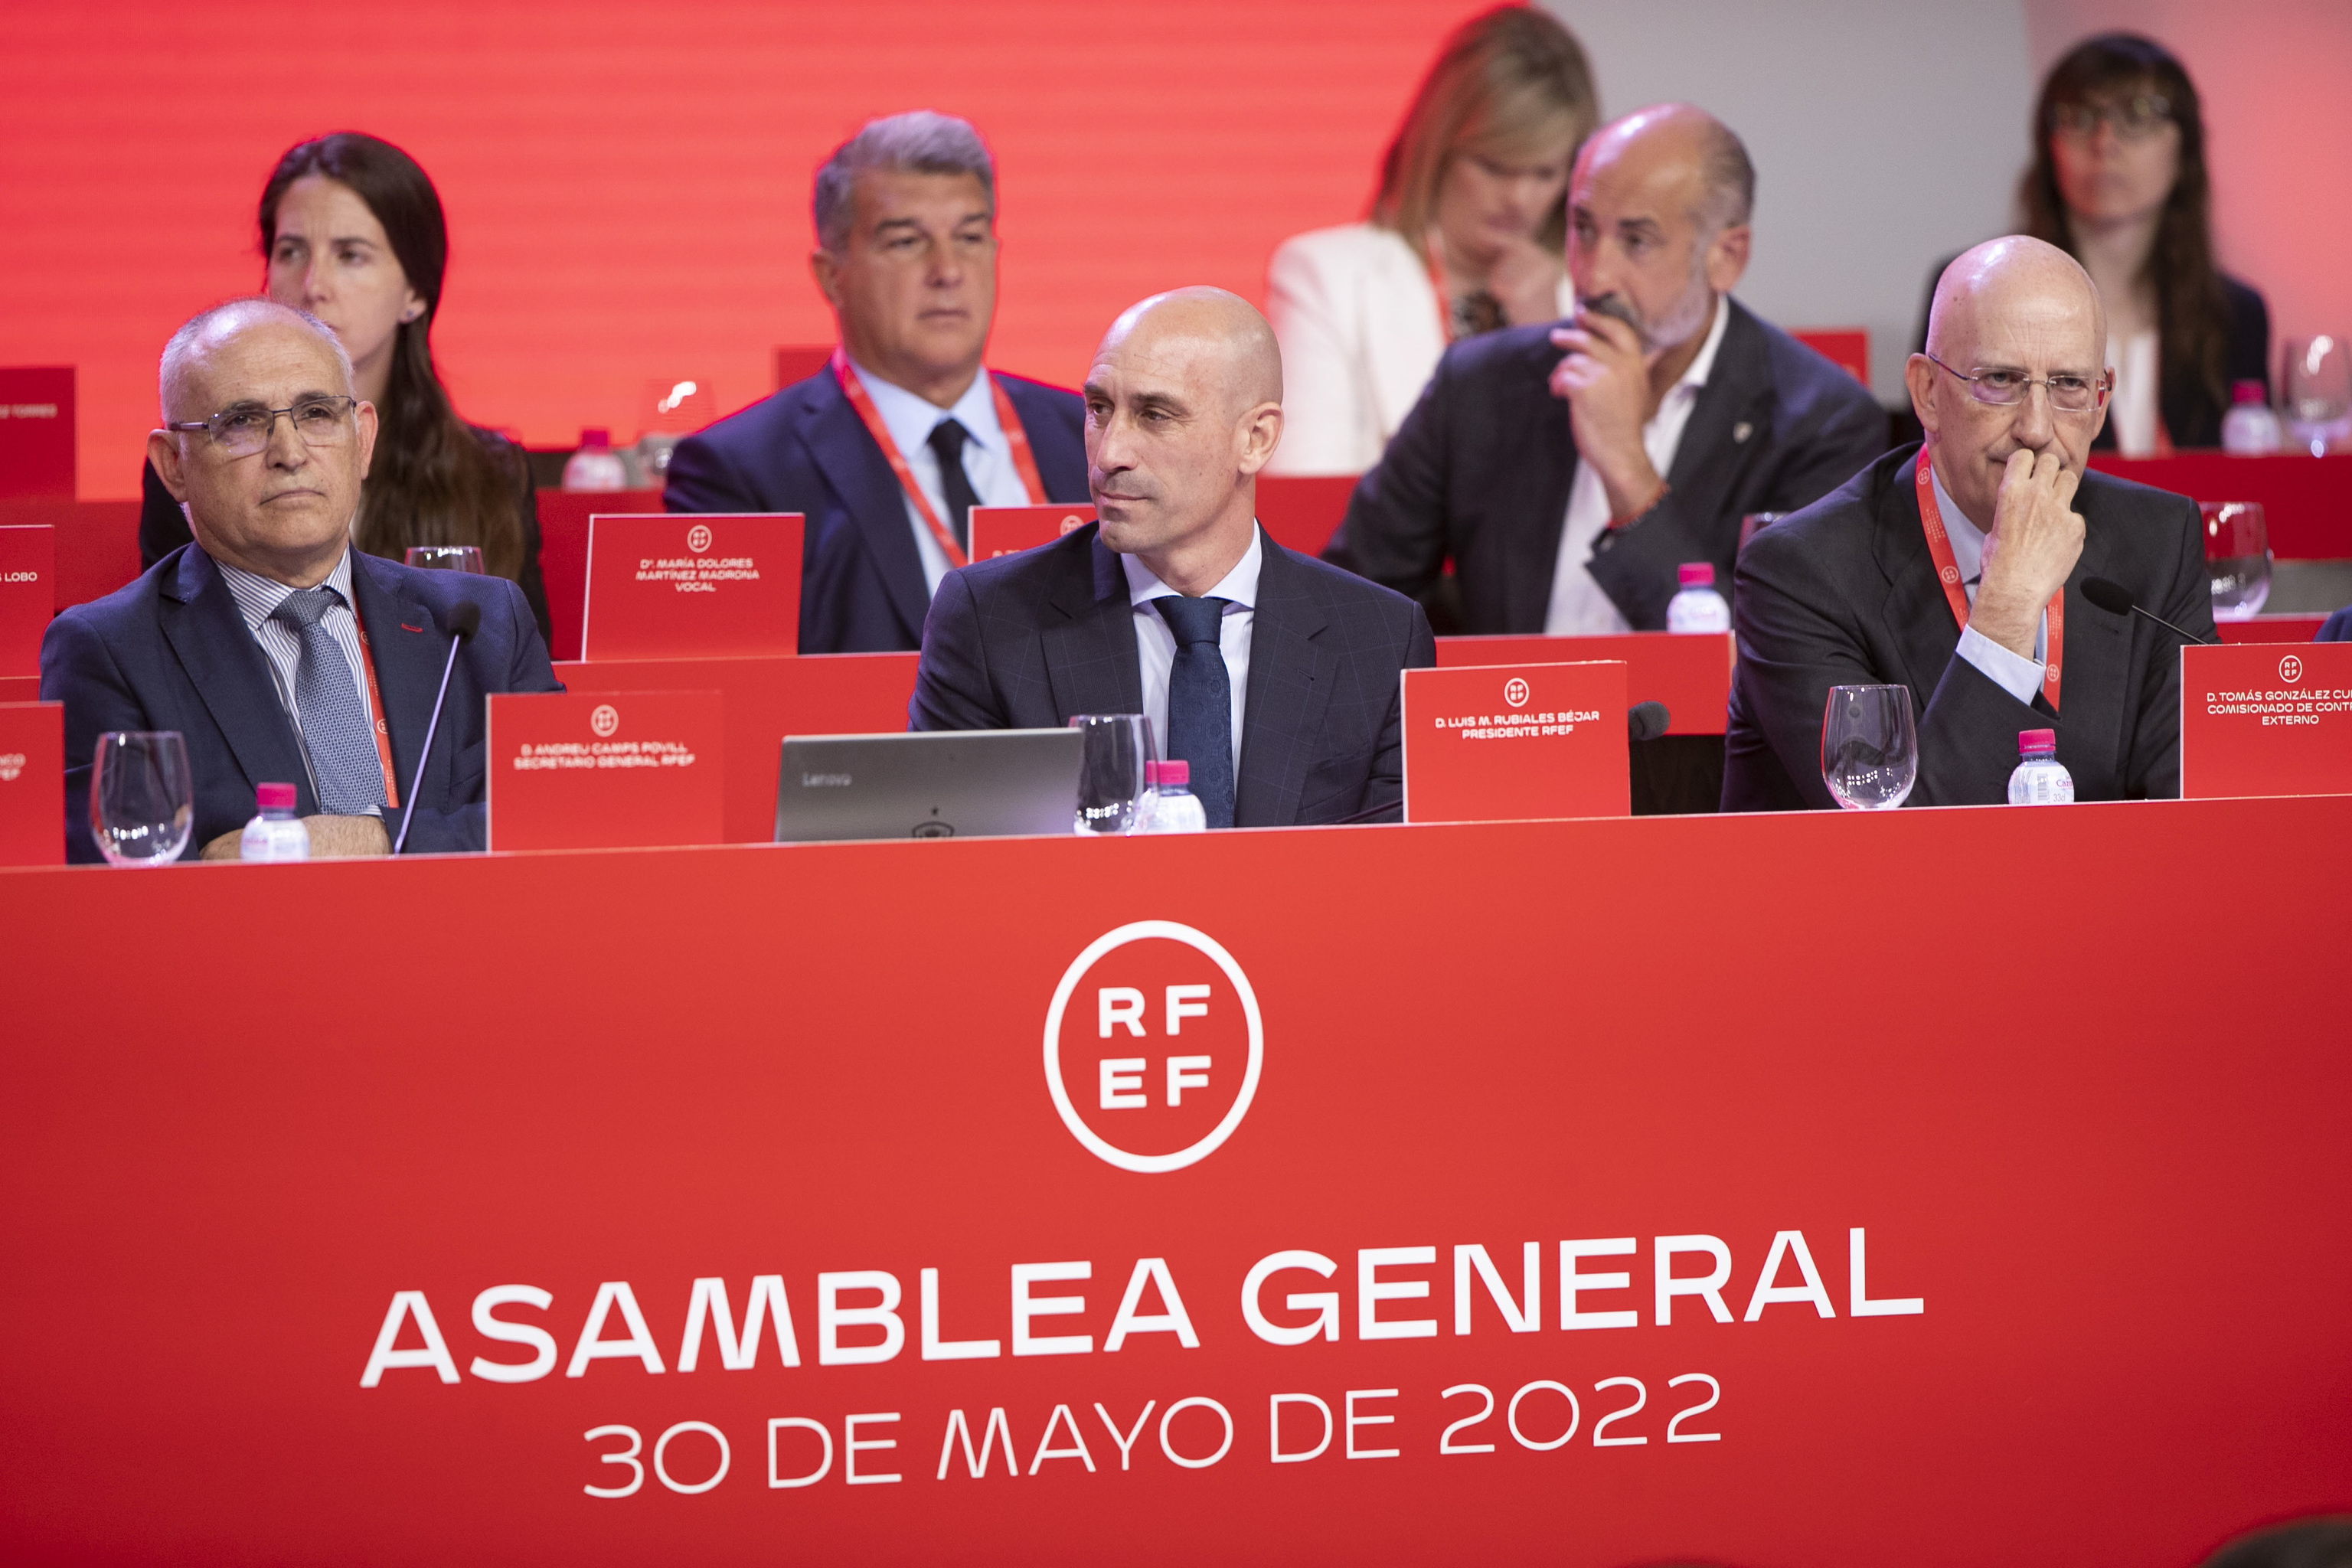 Luis Rubiales during the RFEF assembly.